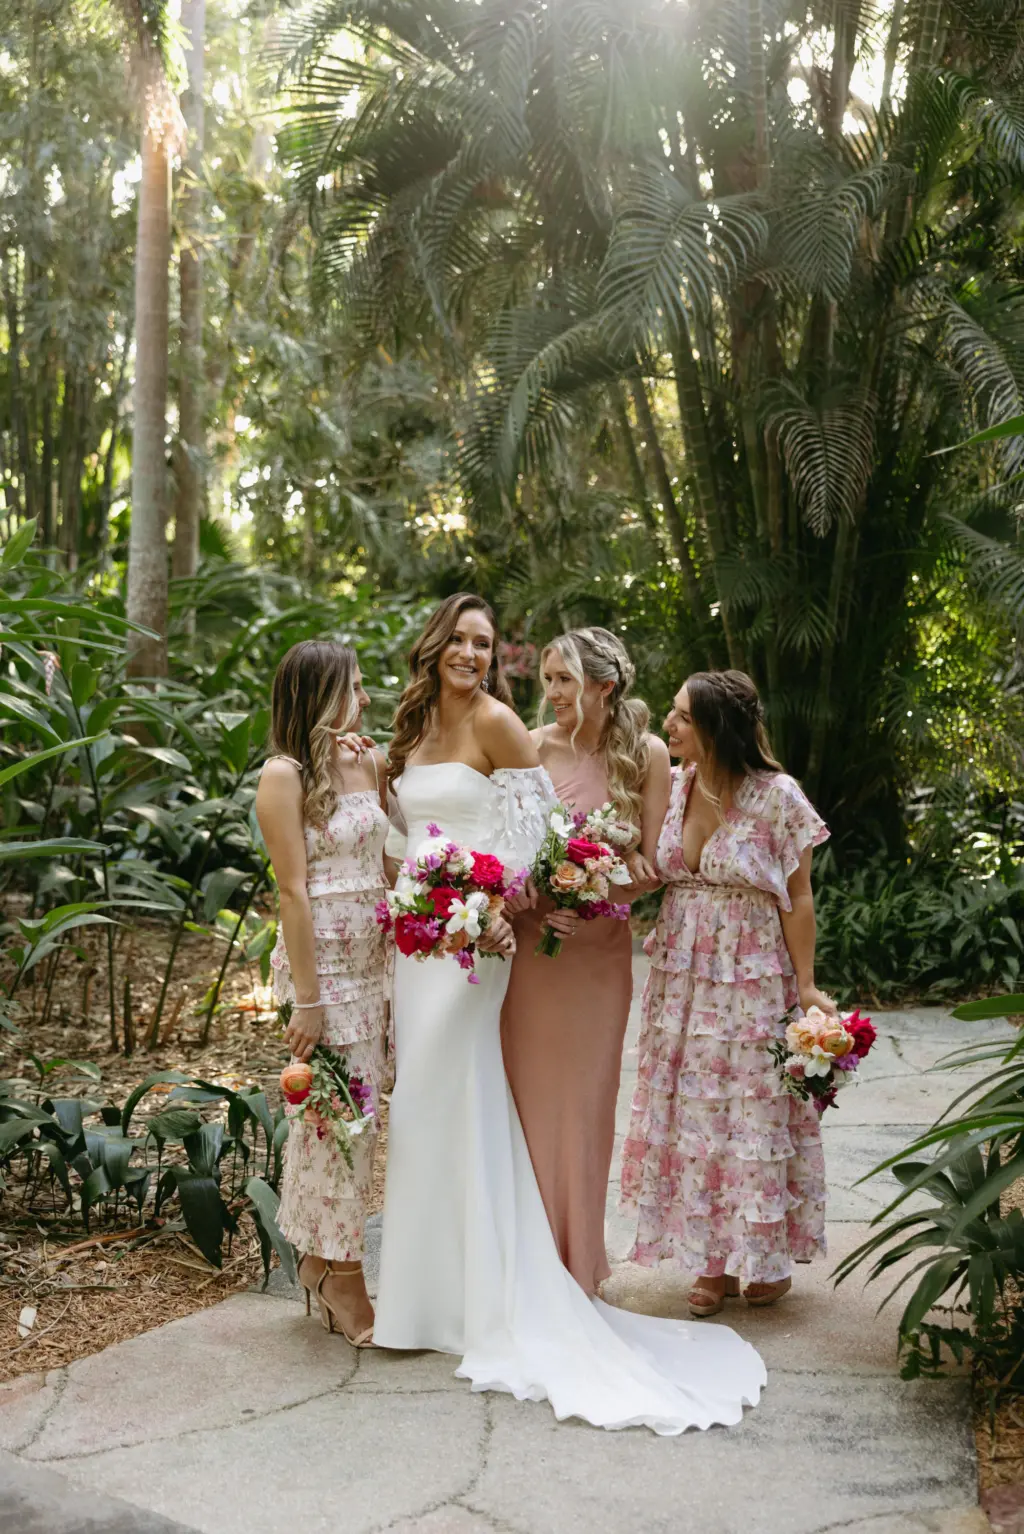 Mismatched Garden Floral Pink and Blush Bridesmaids Wedding Dress Inspiration | Loose Curls Bridesmaid Hair Style Ideas | Tampa Bay Hair and Makeup Artists Femme Akoi Beauty Studio